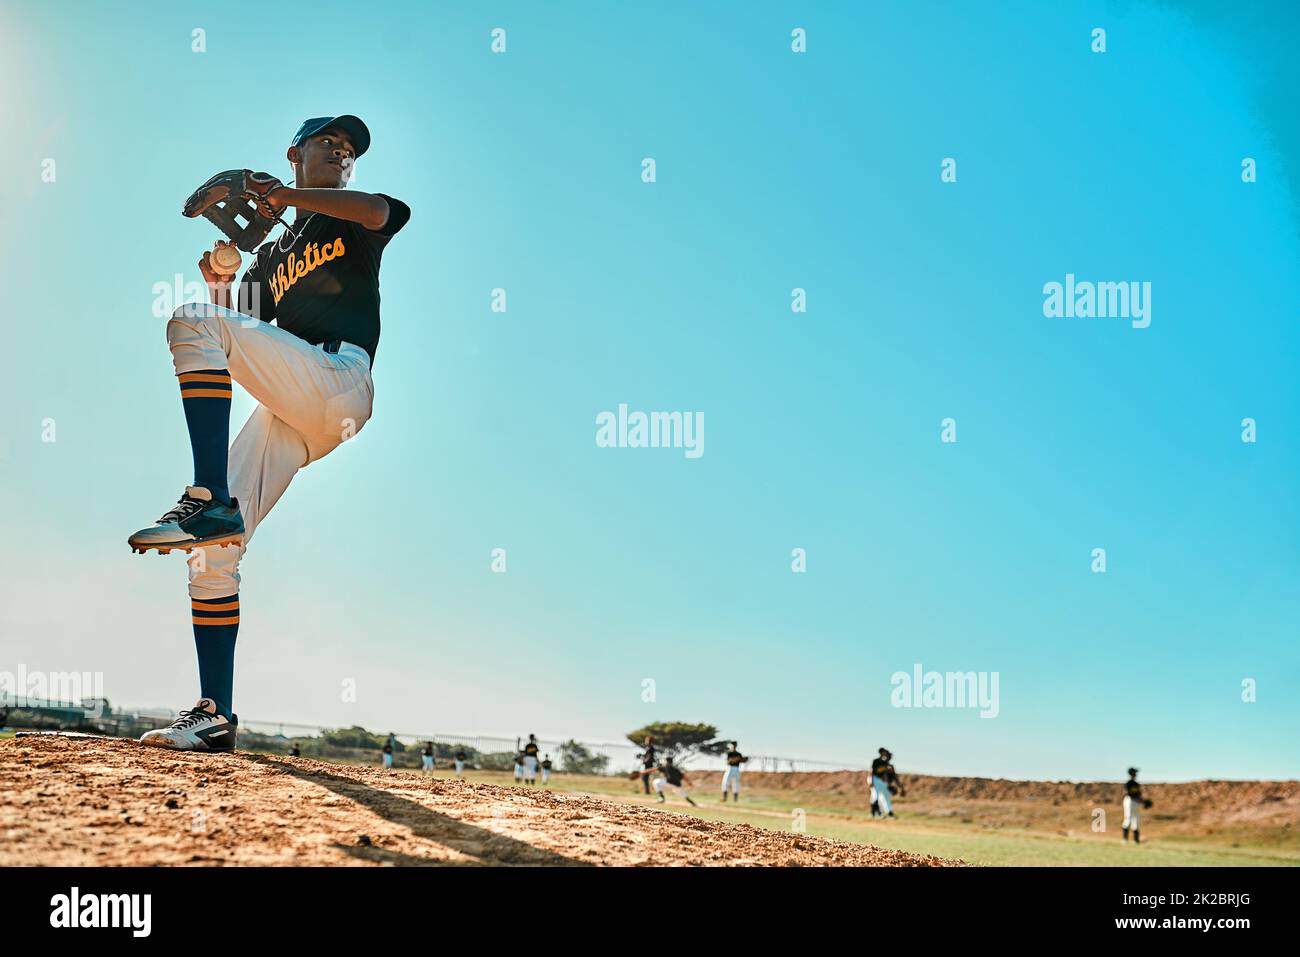 Get ready. Shot of a young baseball player pitching the ball during a game outdoors. Stock Photo